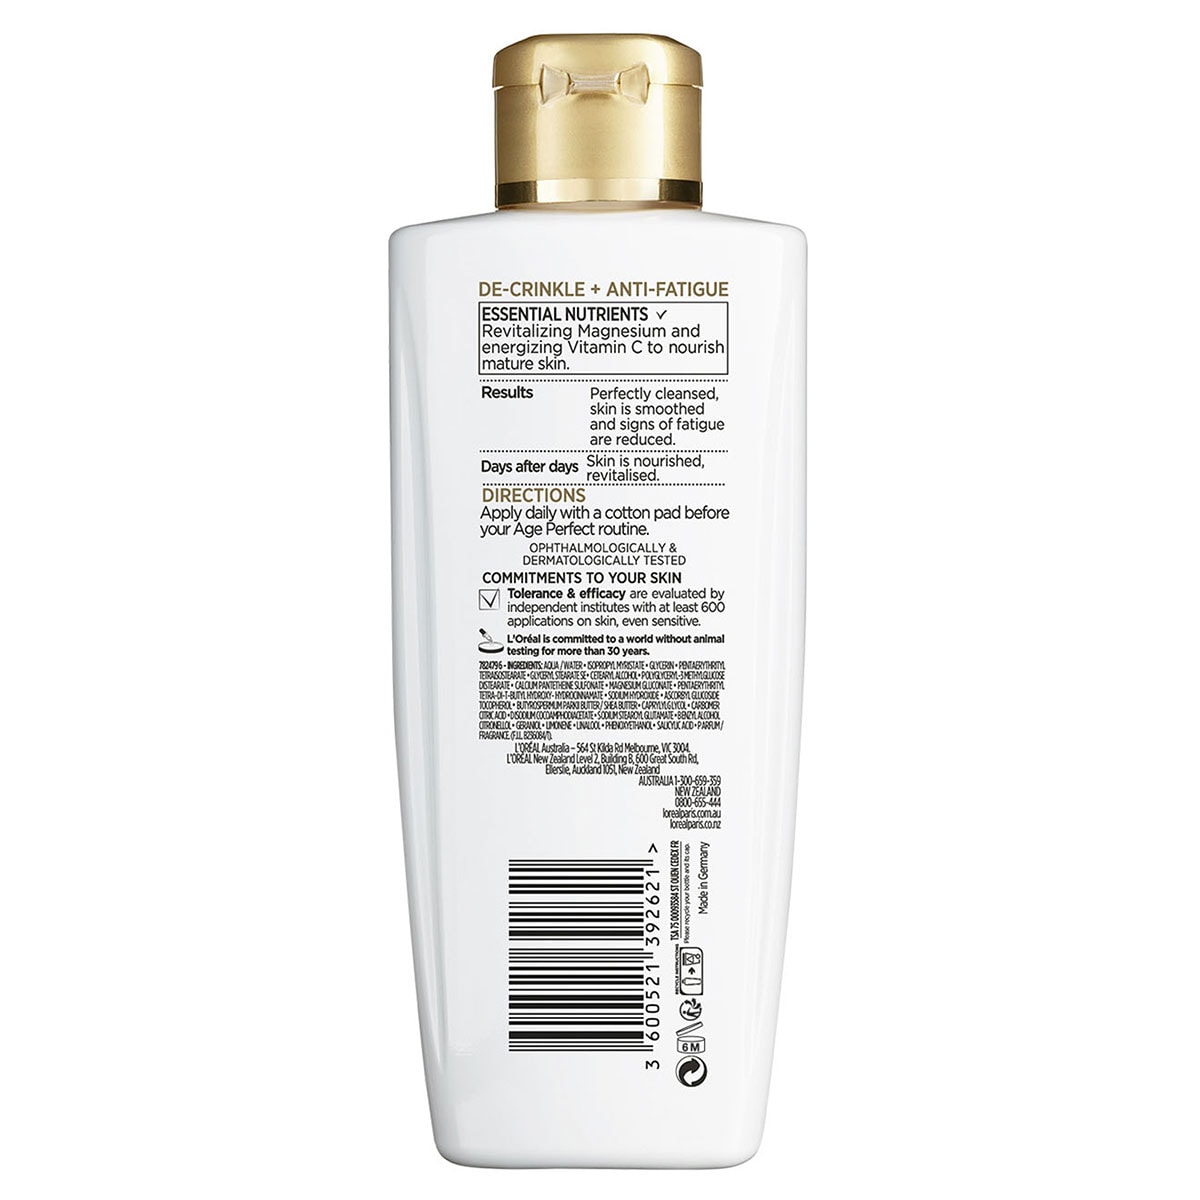 L'Oreal Age Perfect Cleansing Milk 200ml